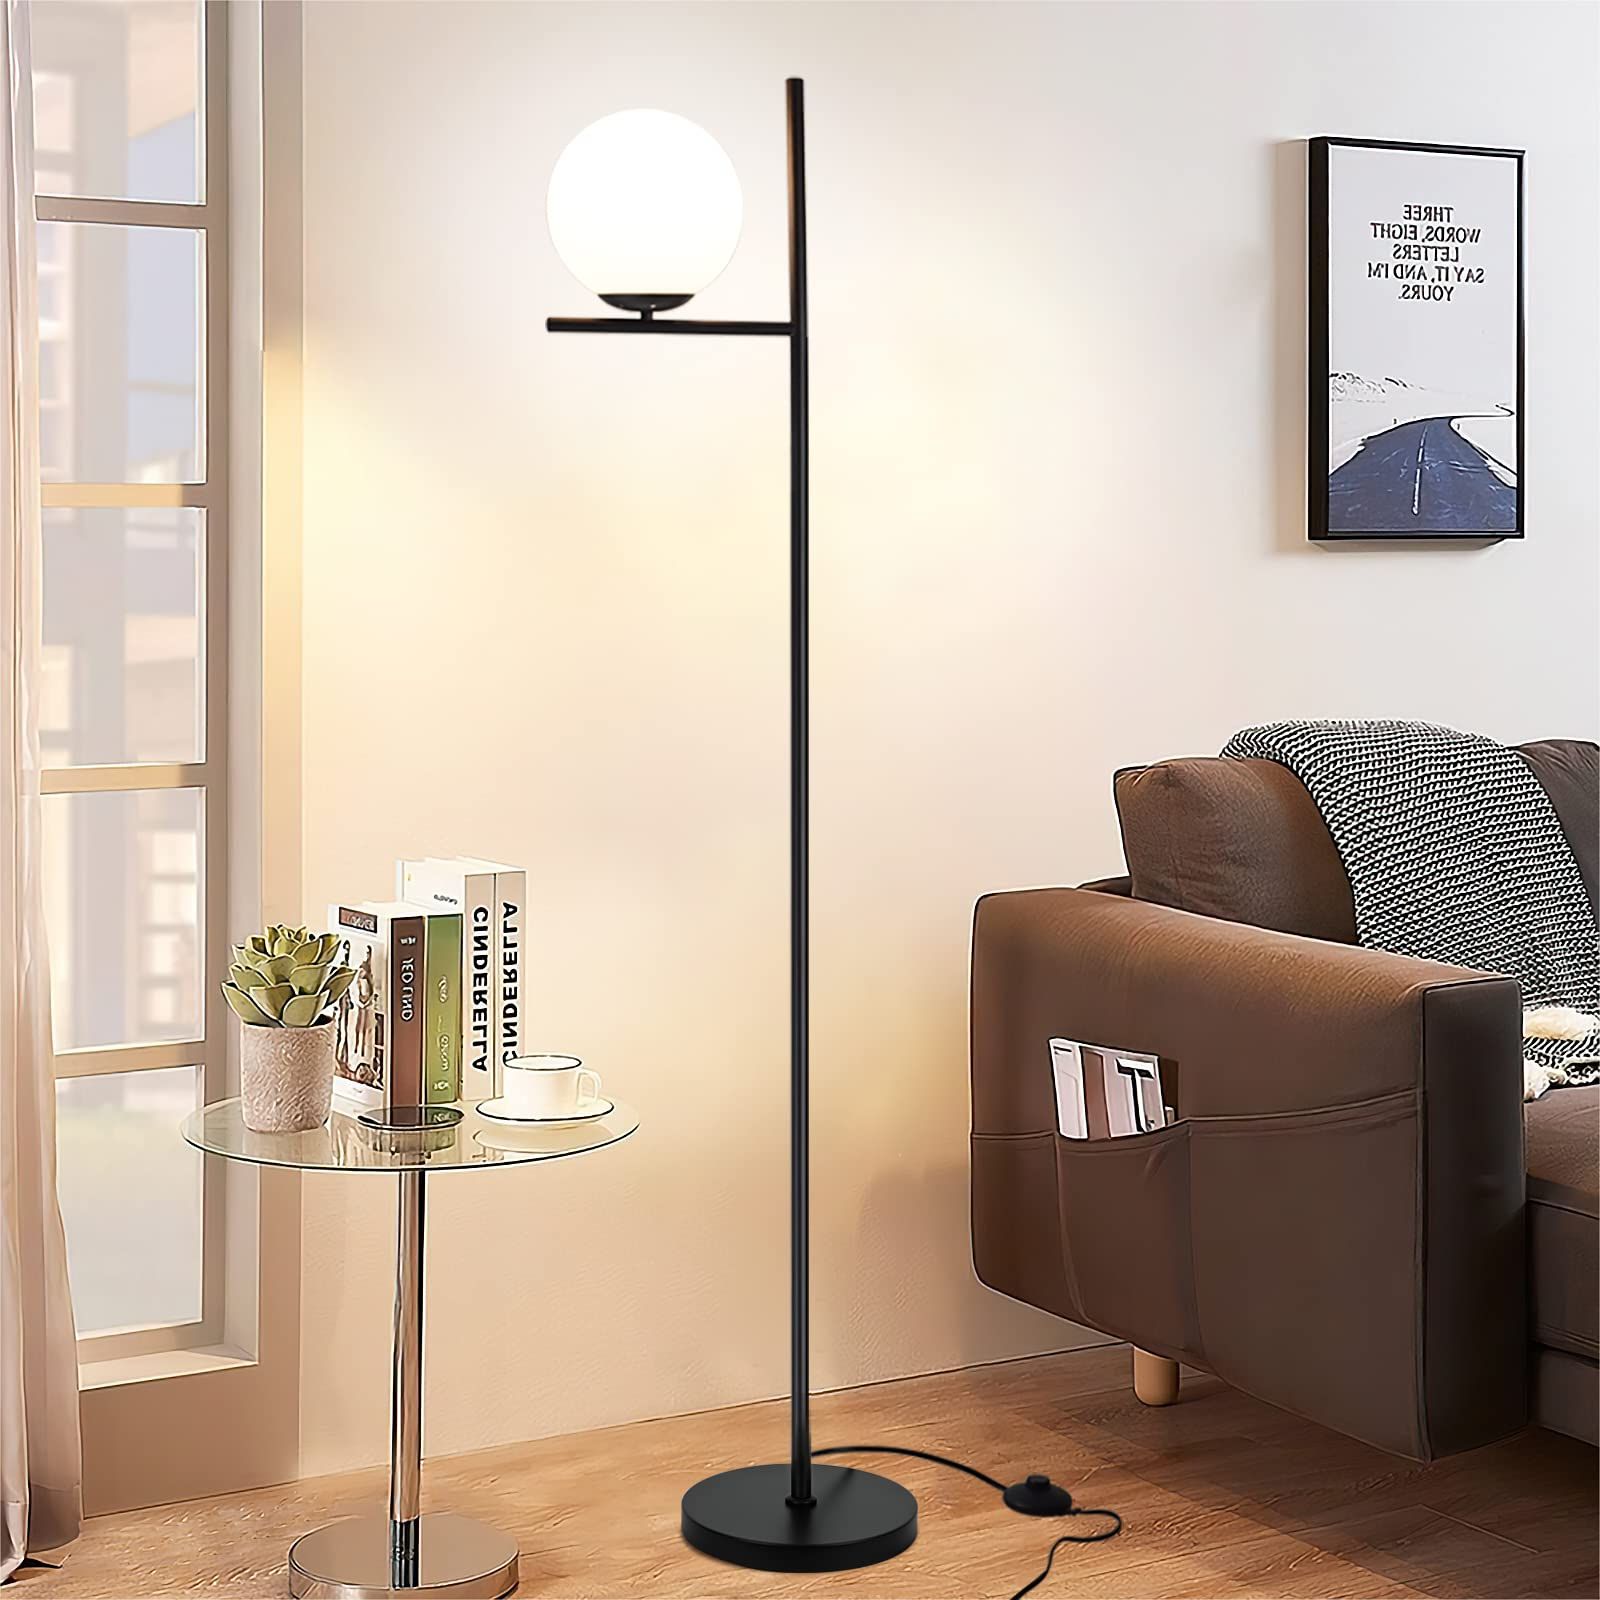 Widely Used Dllt Modern Led Sphere Floor Lamp 9w Frosted Glass Globe Standing Lamps For  Bedroom, Energy Saving Mid Century Tall Pole Standing Accent Lighting For  Living Room, Office, Bedroom, Black – – Amazon With Sphere Standing Lamps (View 9 of 10)